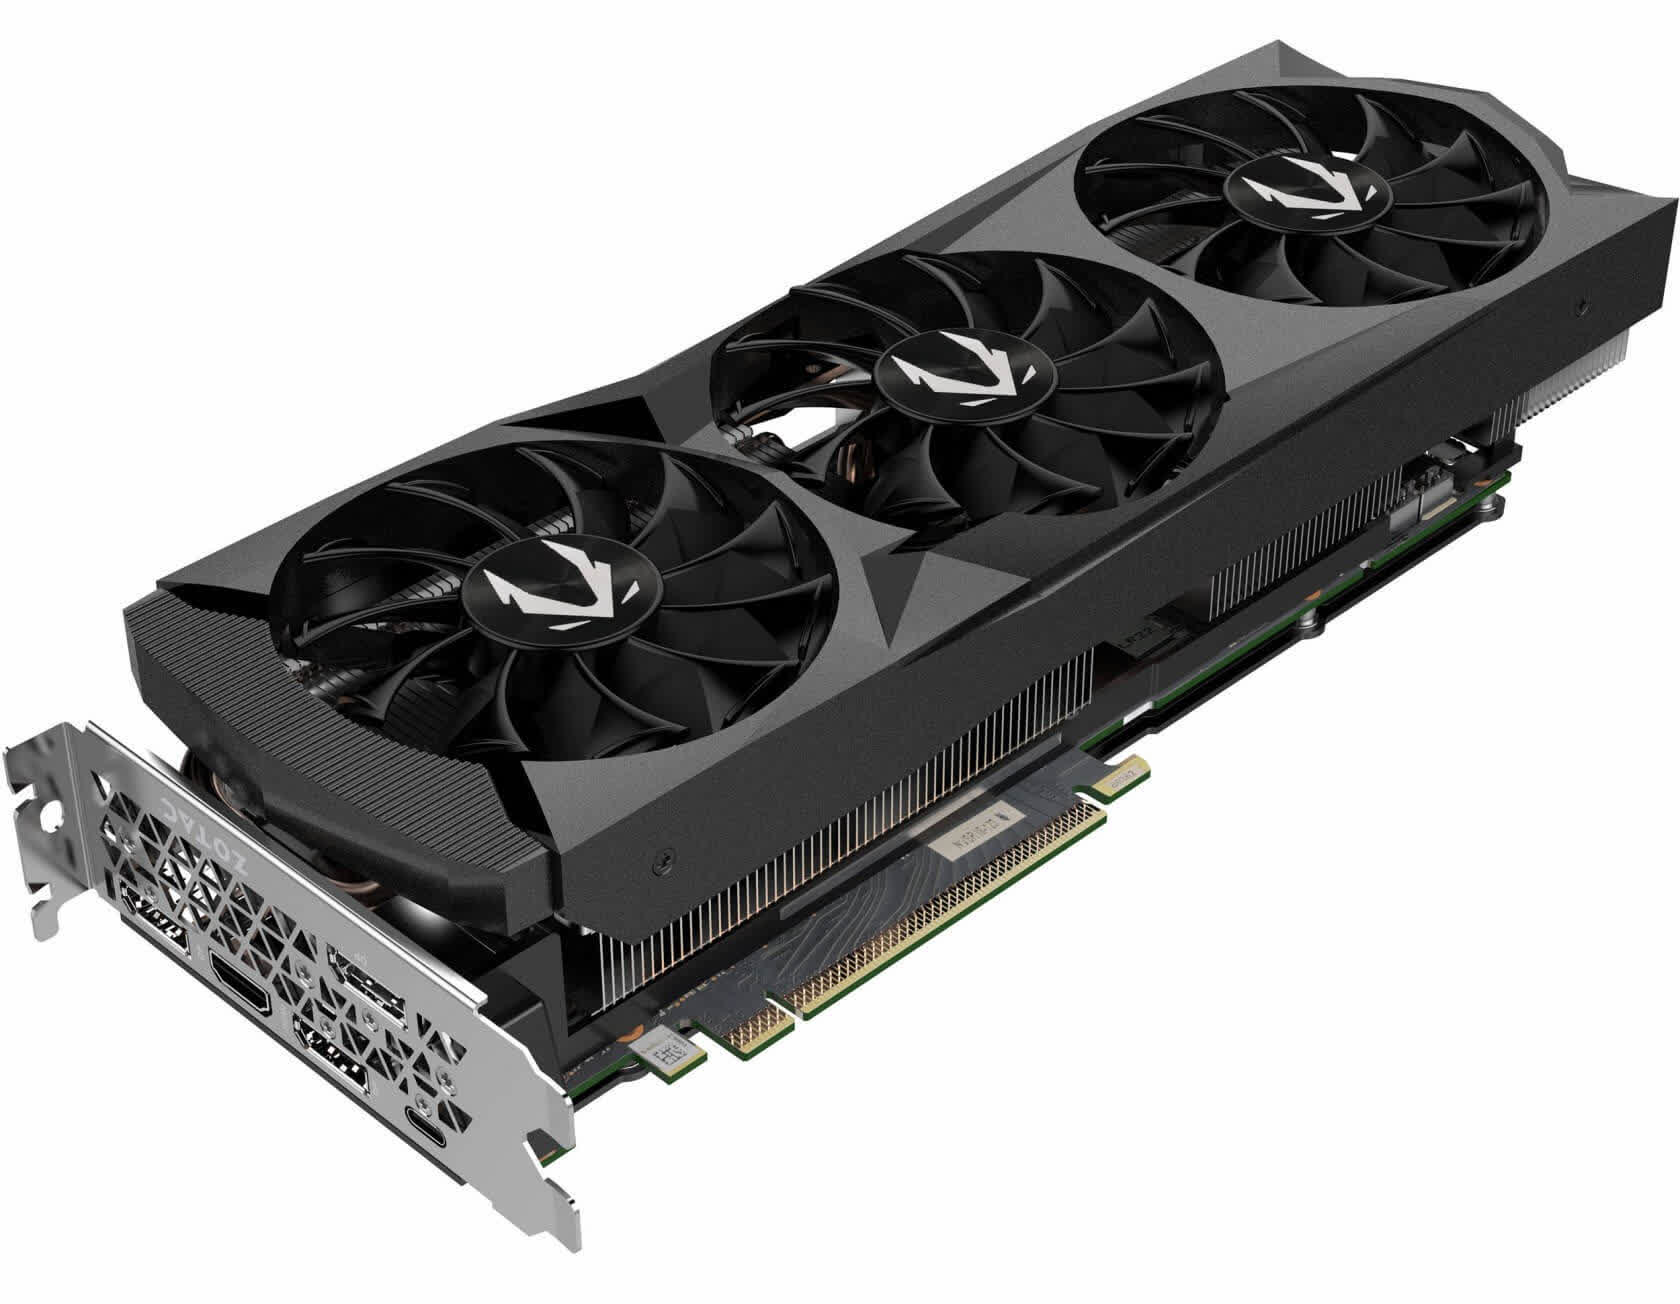 Zotac GeForce RTX 2080 Gaming AMP Reviews, Pros and Cons | TechSpot